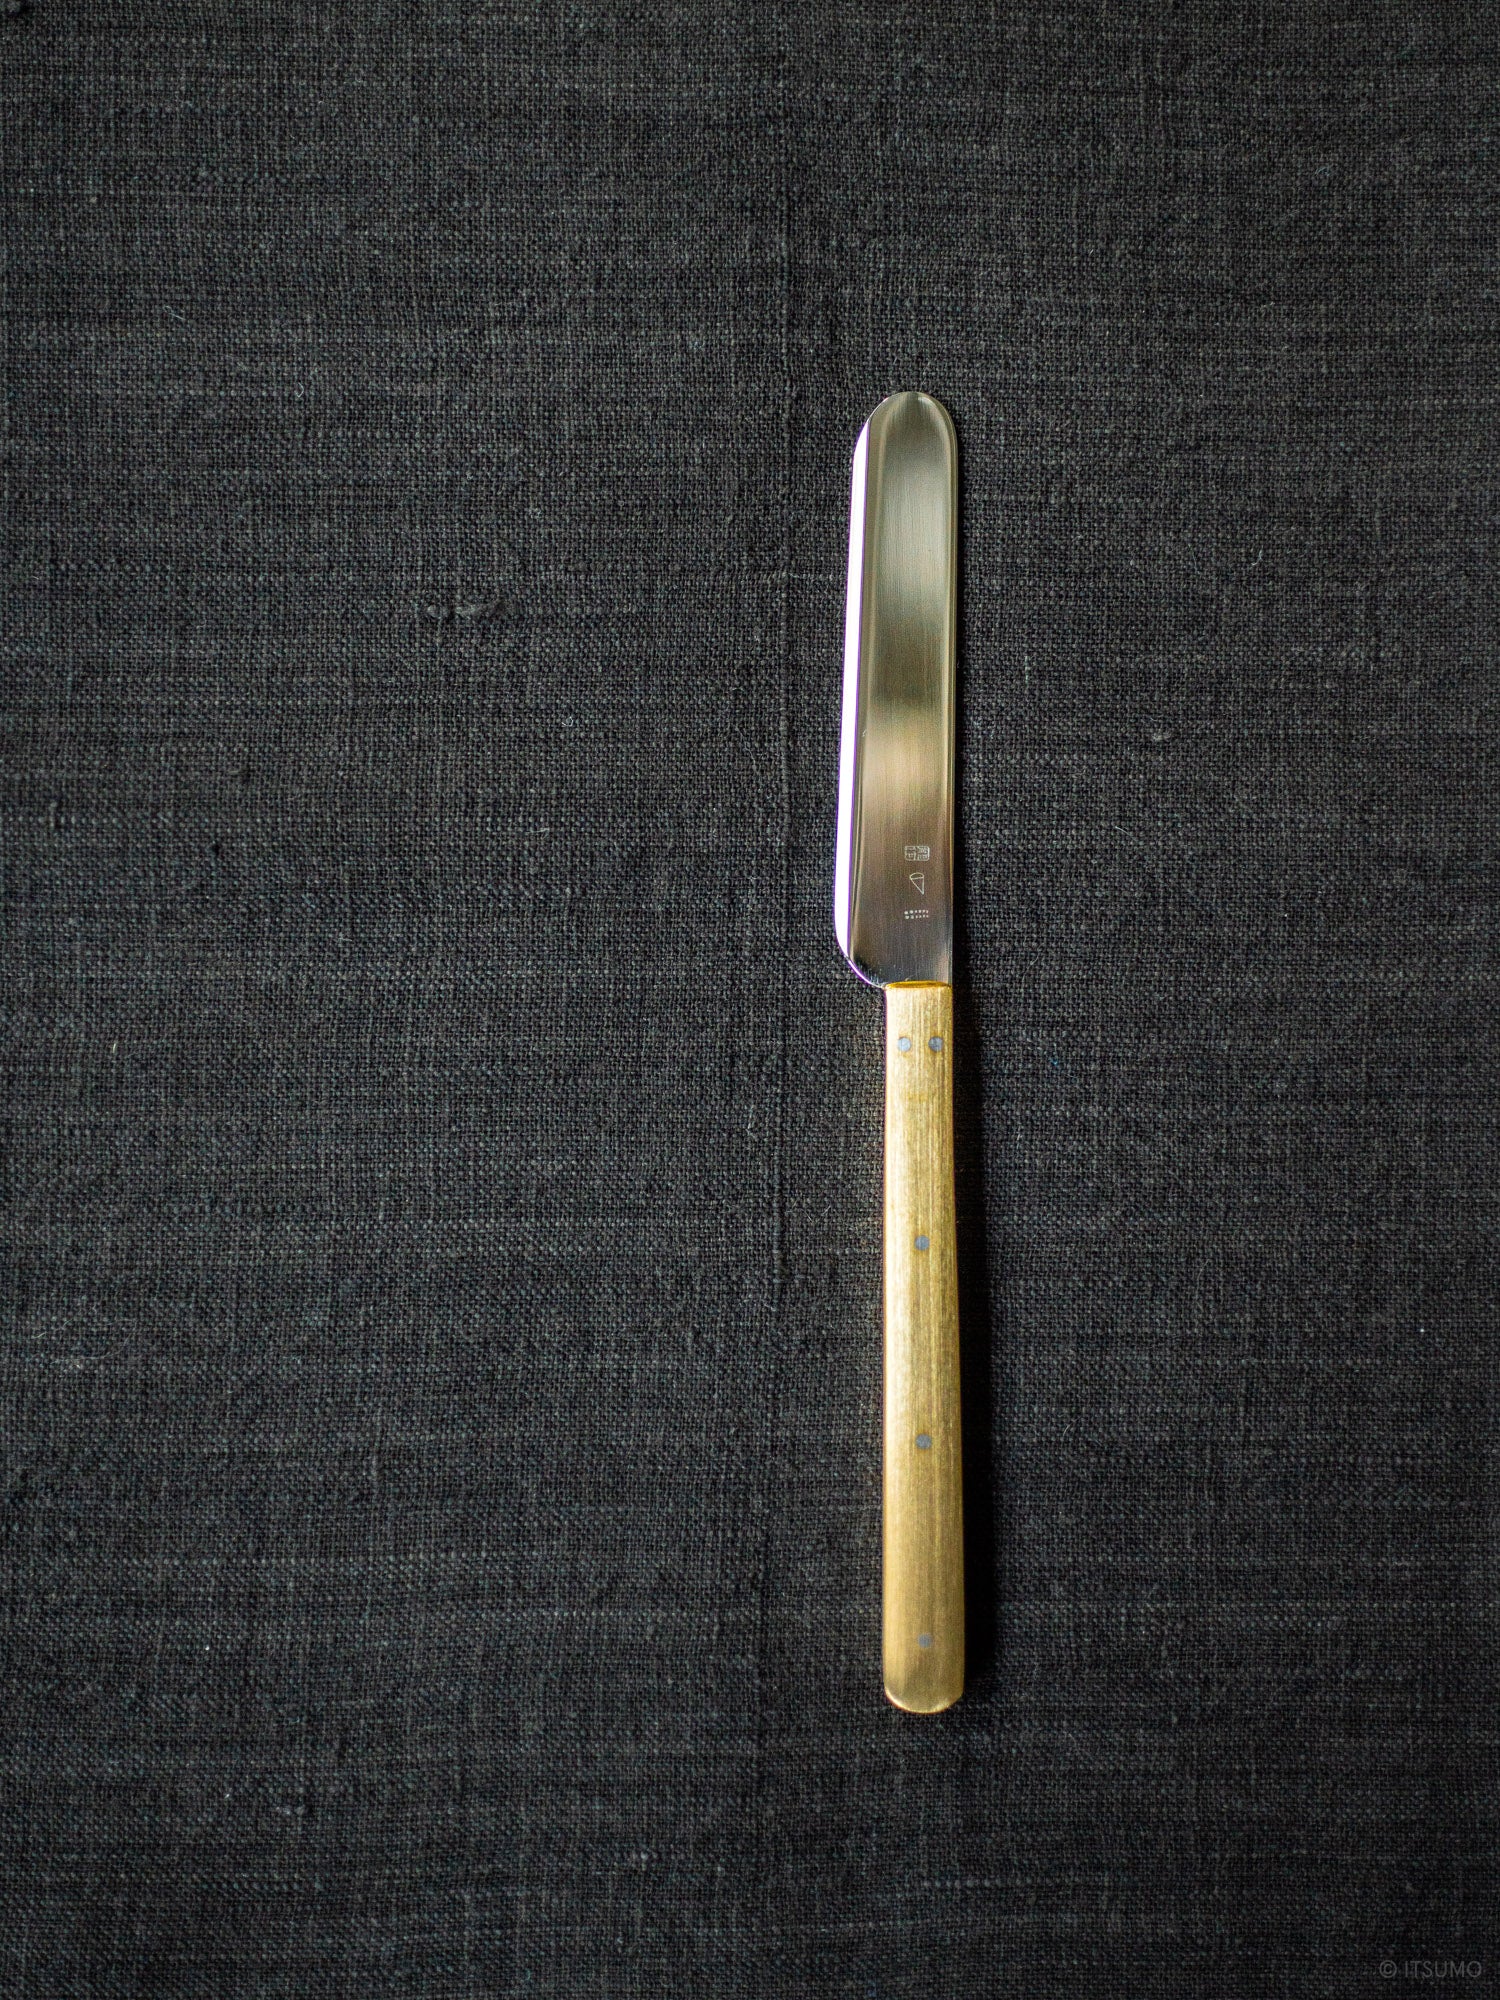 Azmaya butter knife in stainless steel with a brass handle made in Japan